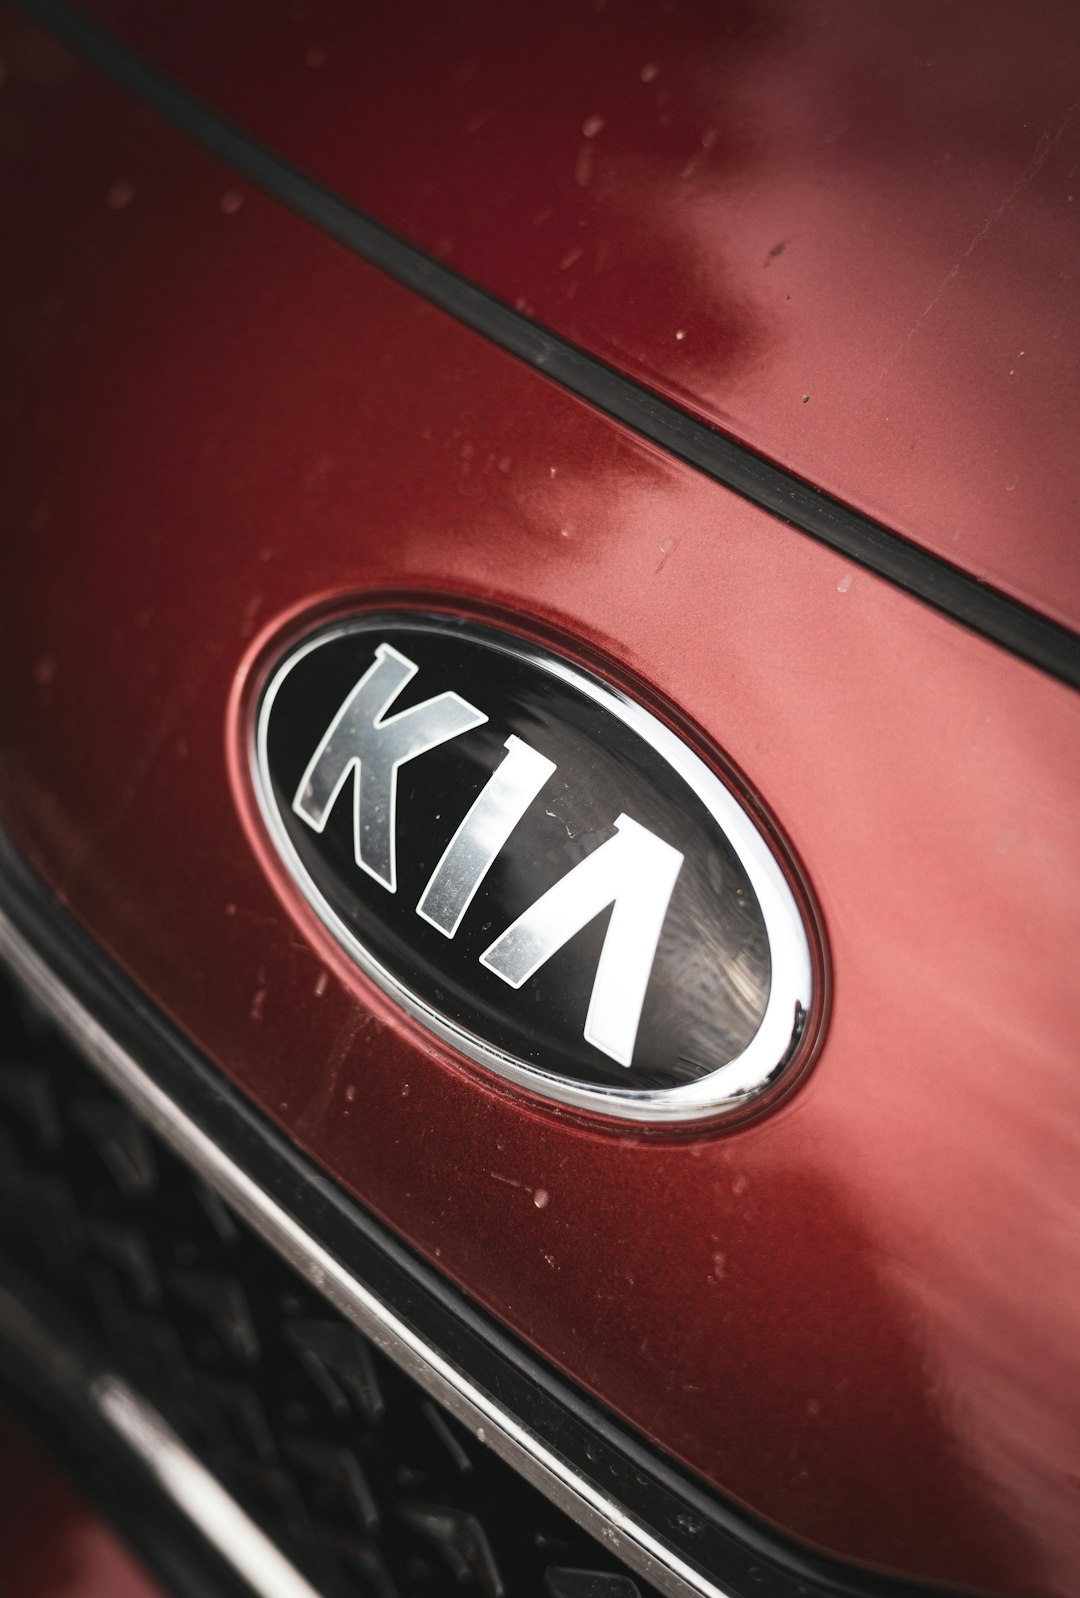 The Kia Sorento Hybrid is a fuel-efficient and eco-friendly SUV that combines the power of a hybrid engine with the spaciousness and versatility of the Sorento model.